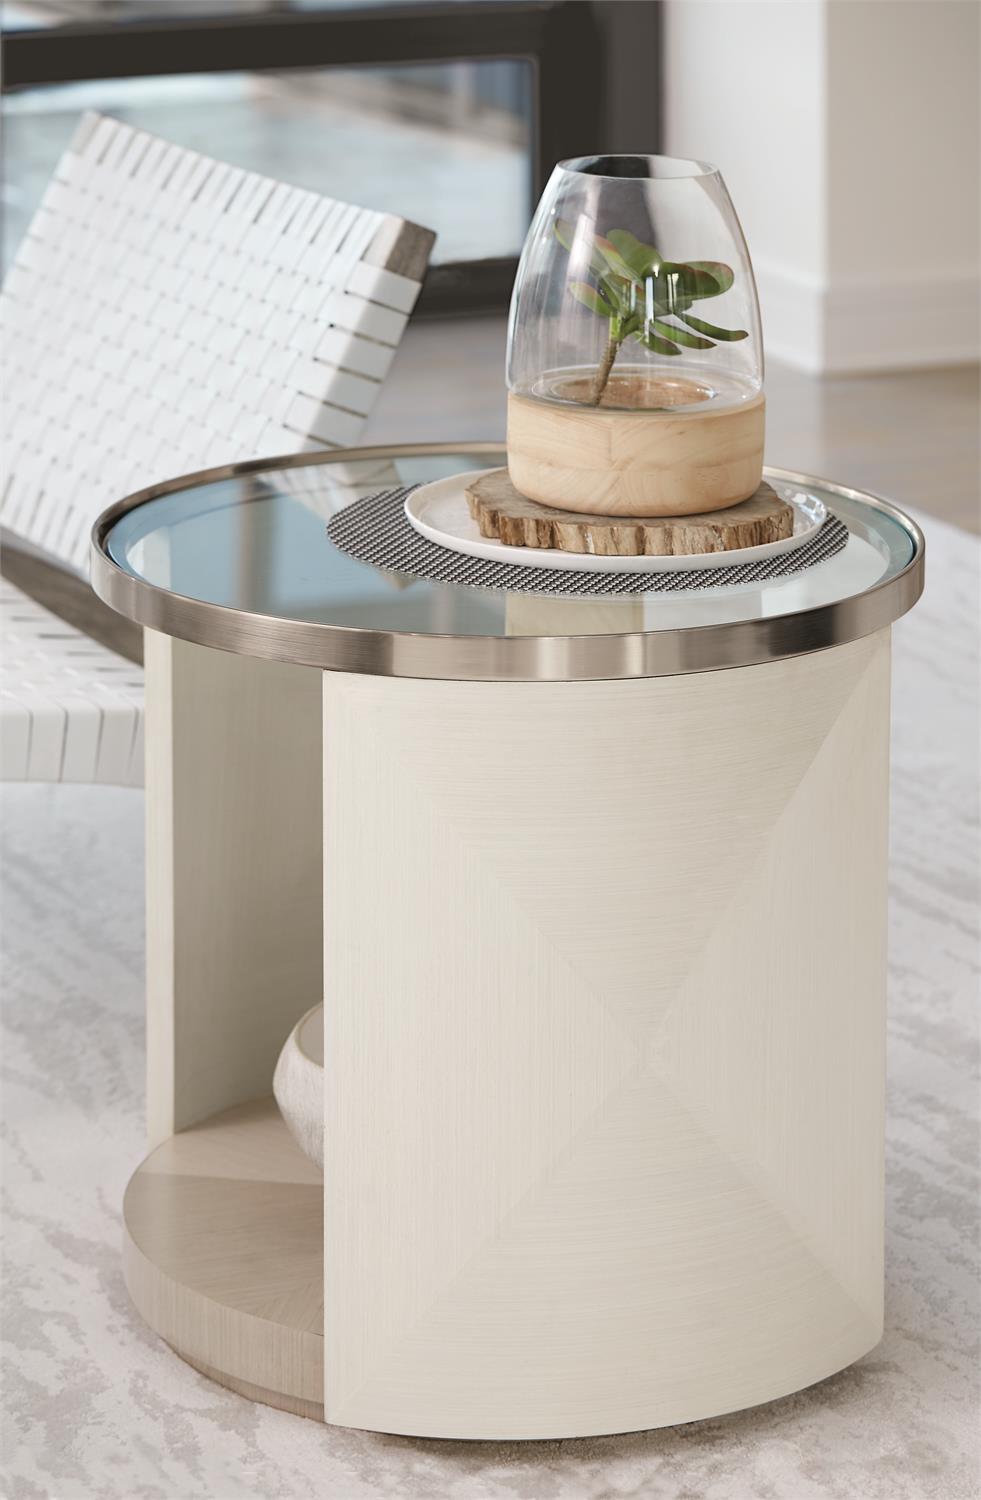 Axiom Round Chairside Table